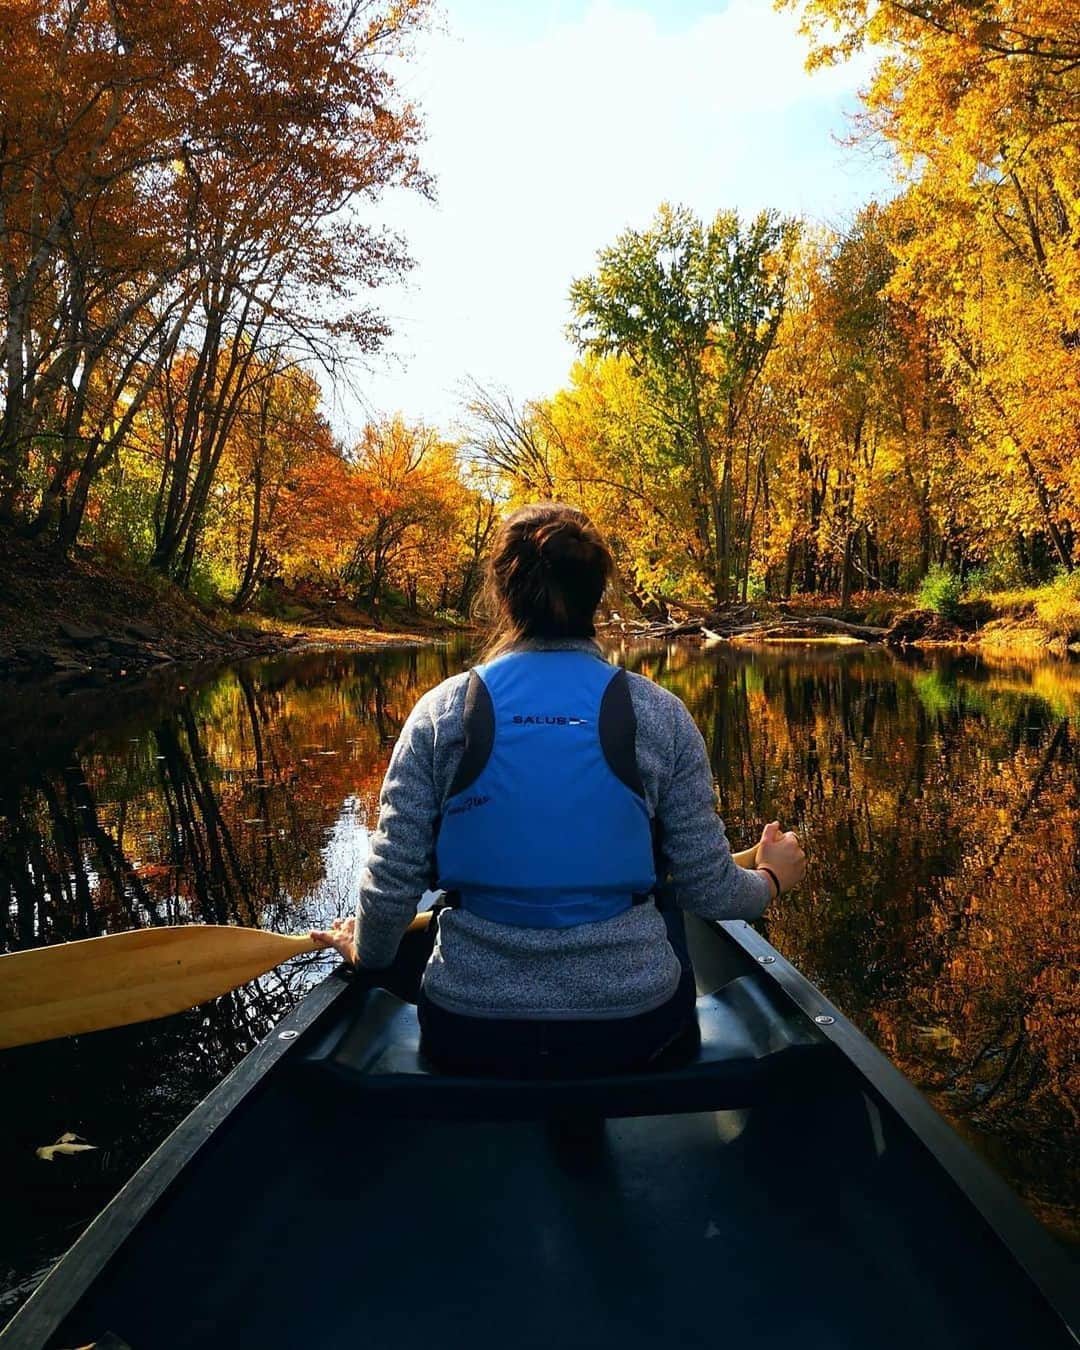 Explore Canadaさんのインスタグラム写真 - (Explore CanadaInstagram)「Today’s #CanadaSpotlight is on autumn views in Canada!⁠⠀ We asked you where your favourite places are to see the beauty of fall. Here are some of your suggestions:⁠⠀ ⁠⠀ ❤️ Floating along in a canoe is a great way to immerse yourself in the many beautiful colours of fall in Fredericton, NewBrunswick.⁠⠀ 🍁 Dundas Peak in Ontario is the perfect place for a hike among the fall foliage, with panoramic views across the treetops.⁠⠀ 🧡 Kluane National Park in the Yukon begins to turn a kaleidoscope of colours in August every year.⁠⠀ 🍂 Twirling in the leaves in Quebec City, where the trees become vivid shades of red, orange and yellow.⁠⠀ 💛 The East Kootenays offers incredible views of the larch trees turn a stunning yellow and orange.⁠⠀ ⁠⠀ Thank you for all your suggestions, keep them coming and we’ll share more in future posts! #ExploreCanada⁠⠀ ⁠⠀ *Know before you go! Check the most up-to-date travel restrictions and border closures before planning your trip and if you're travelling in Canada, download the COVID Alert app to your mobile device.*⁠⠀ ⁠⠀ 📷: ⁠⠀ ⁠⠀ 1. @ryan.evan11⁠⠀ 2. @llydia_o⁠⠀ 3. @robford60⁠⠀ 4. @nathalielefebvre0777⁠⠀ 5. @chsquaredphoto⁠⠀ ⁠⠀ 📍:⁠⠀ 1. @fredtourism, @destinationnb  2. @ontariotravel ⁠⠀ 3. @travelyukon⁠⠀ 4. @quebeccite, @tourismequebec⁠⠀ 5. @kootrocks, @hellobc⁠⠀ ⁠⠀ #DiscoverON #ExploreFredericton #ExploreNB #QuebecCite #BonjourQuebec #ExploreYukon #KootRocks #ExploreBC⁠⠀ ⁠⠀」10月3日 1時35分 - explorecanada